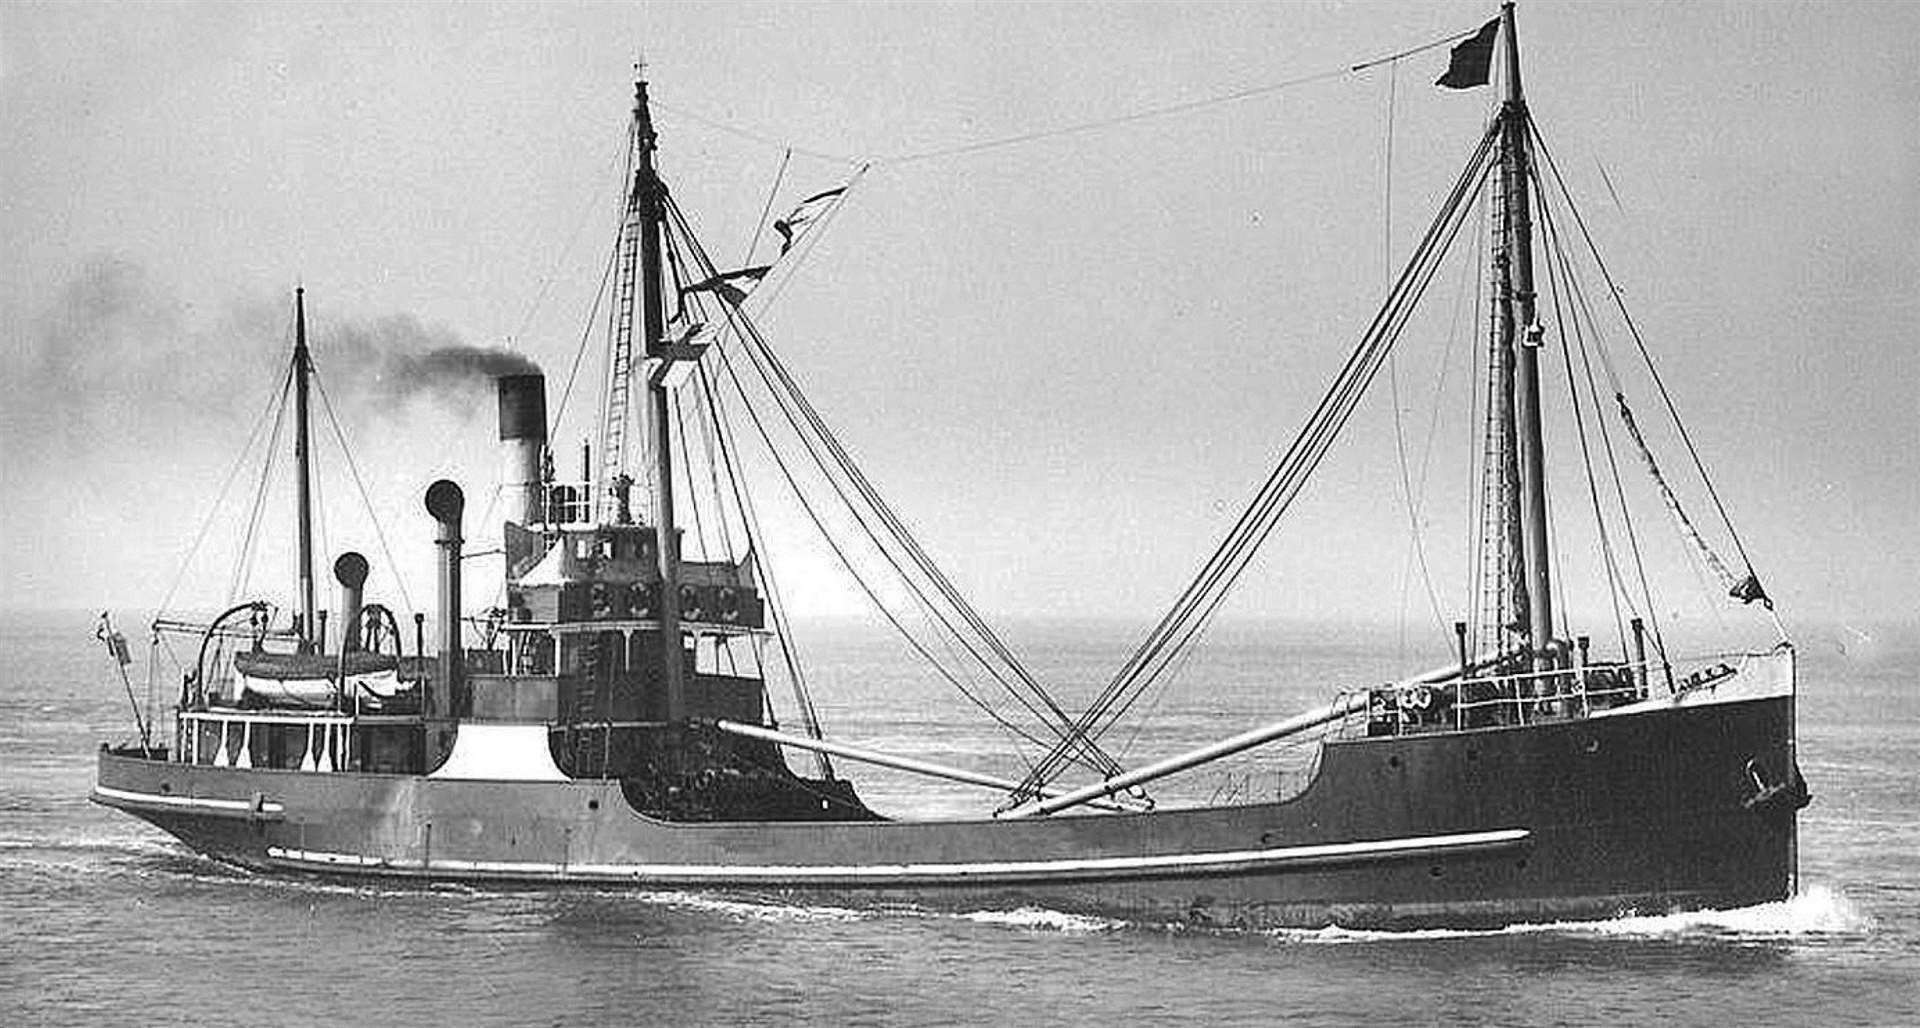 The Merchant Navy vessel Isleford broke in two after being battered against the rocks in Wick Bay in January 1942.